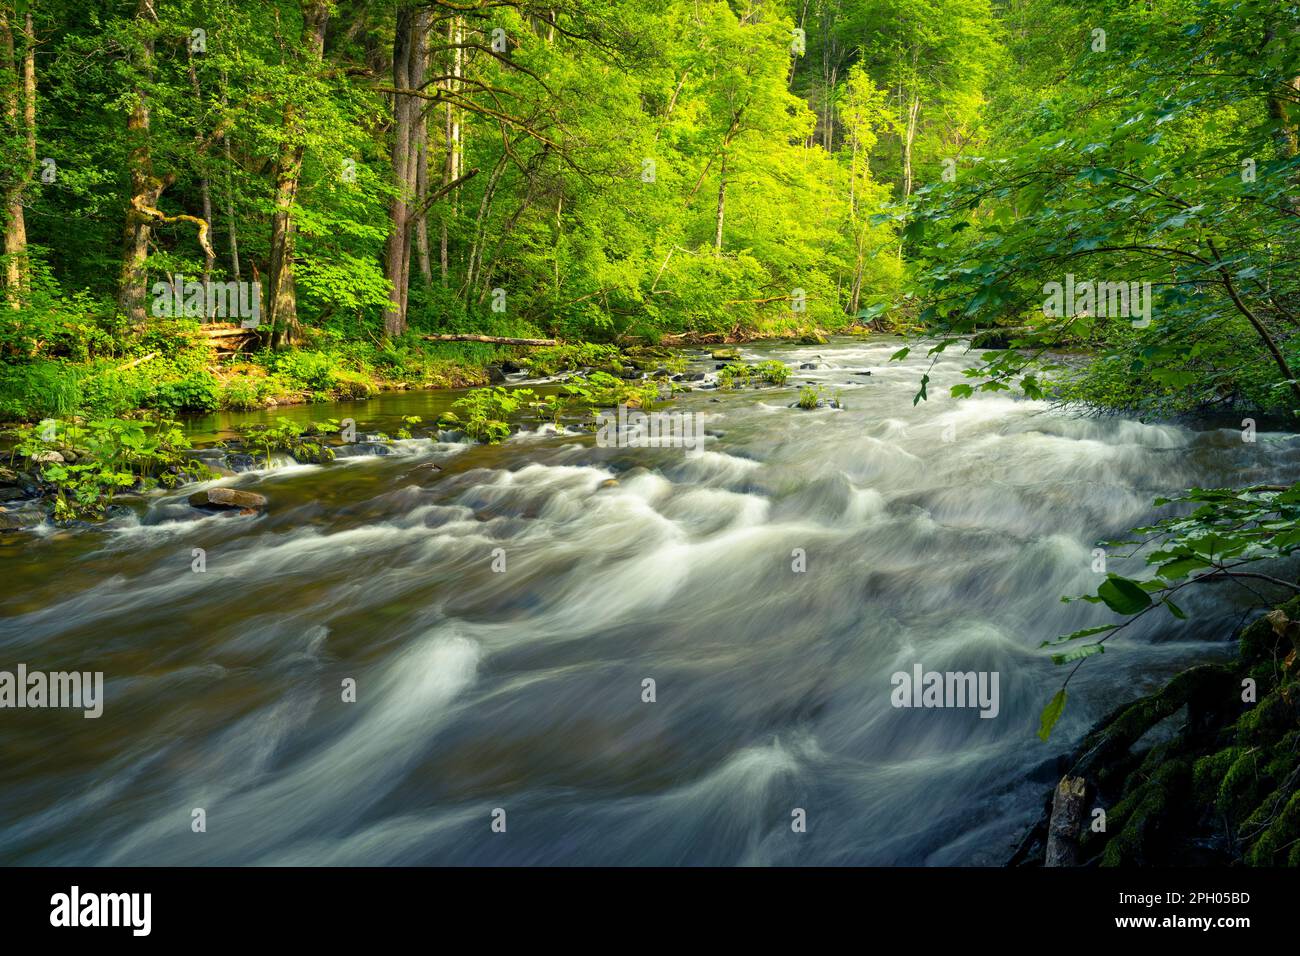 Landscape in the Black Forest, river Wutach in the Wutach canyon (Wutachschlucht). Germany Stock Photo